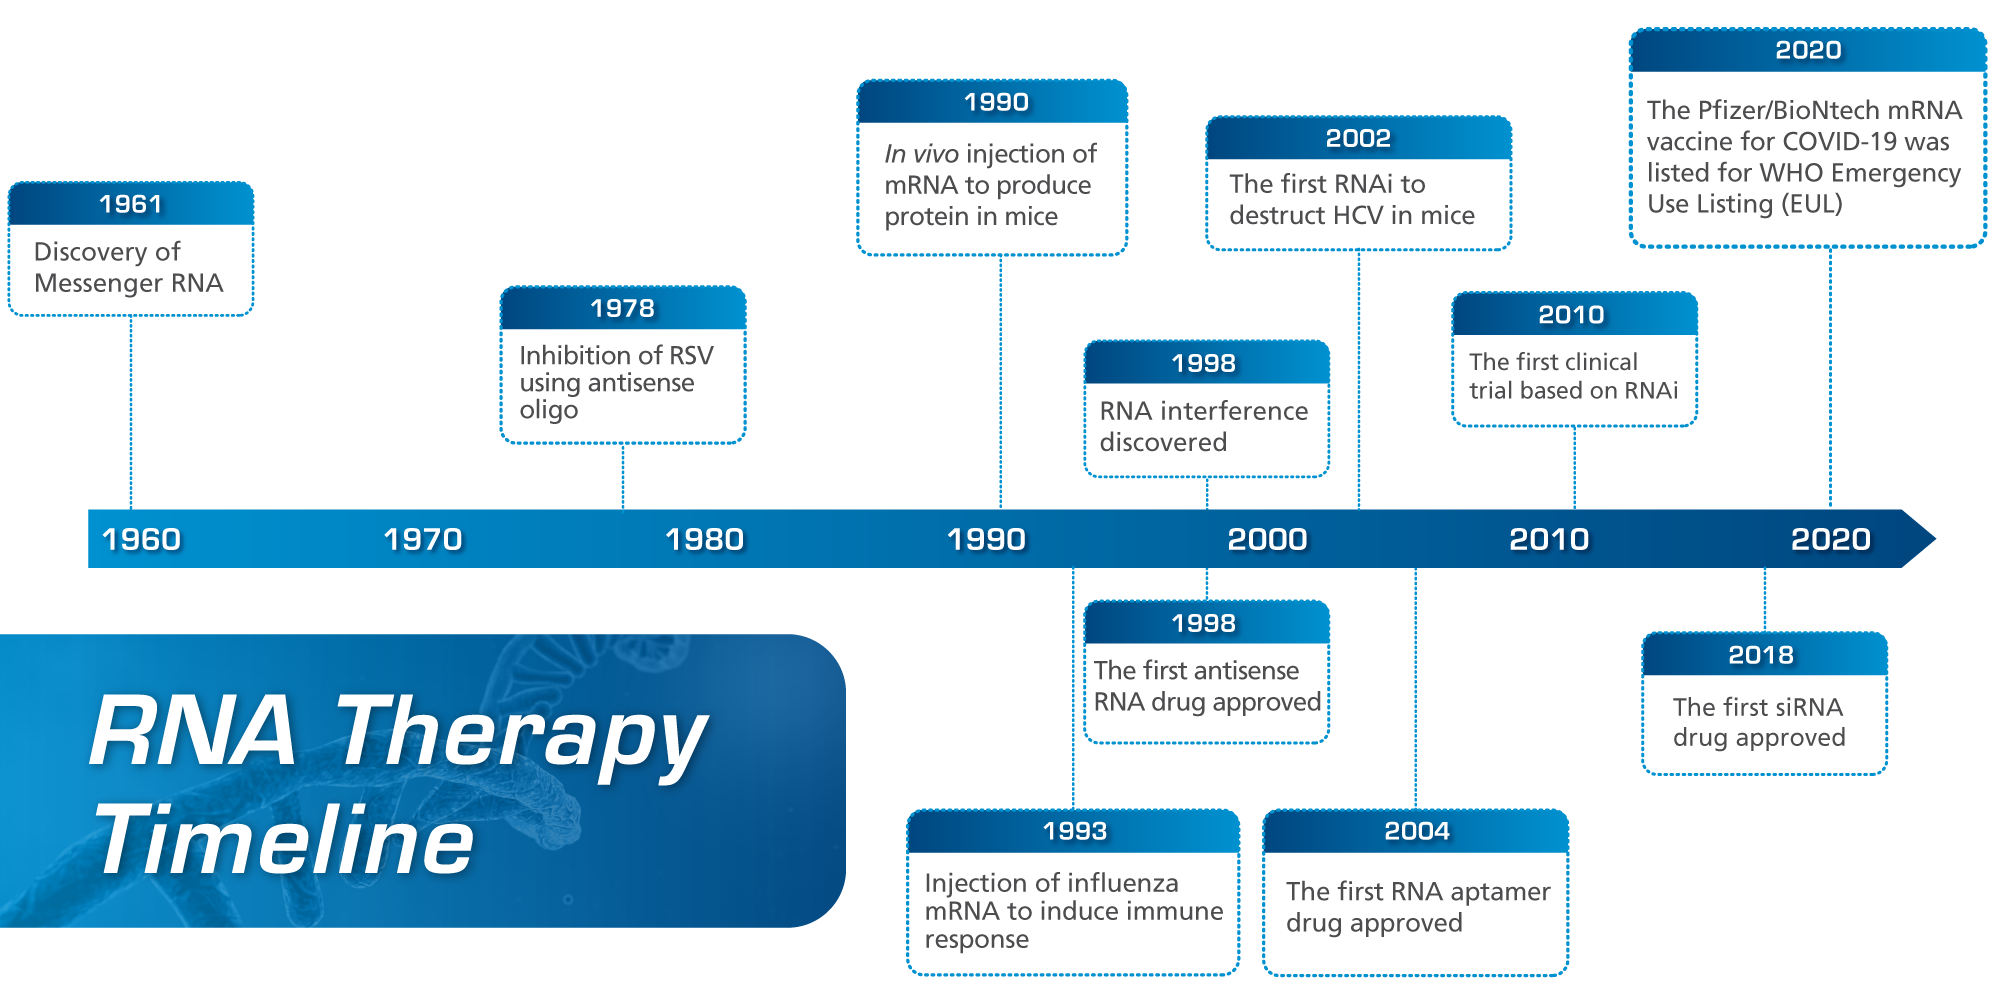 Figure 2. Timeline of Key Discoveries in RNA Therapy